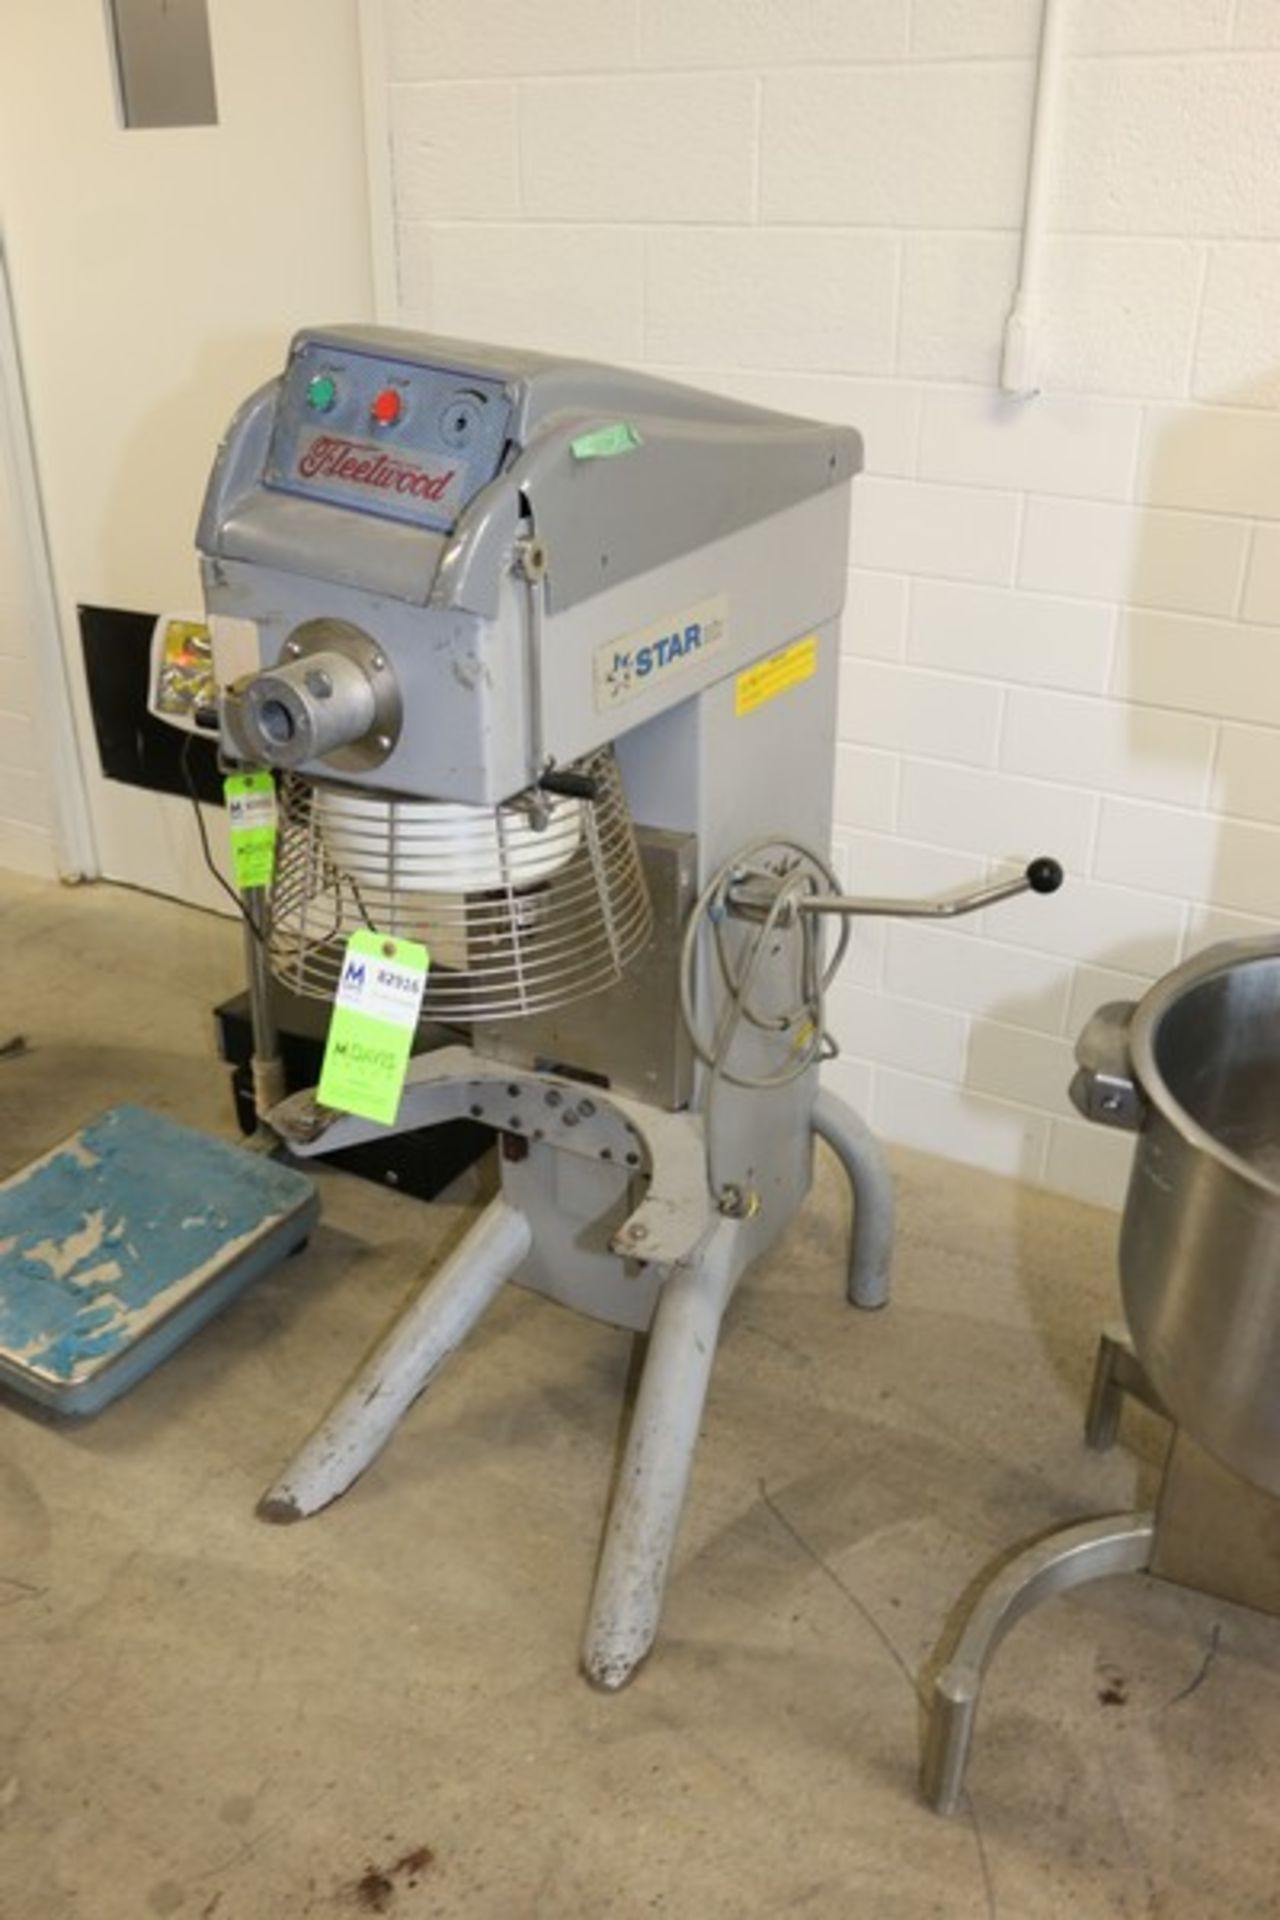 Star Mix S.R.L. Bakery Mixer,M/N PL30HA, S/N 324293, Weight 480 kg, with 2 hp Motor (NOTE: Missing